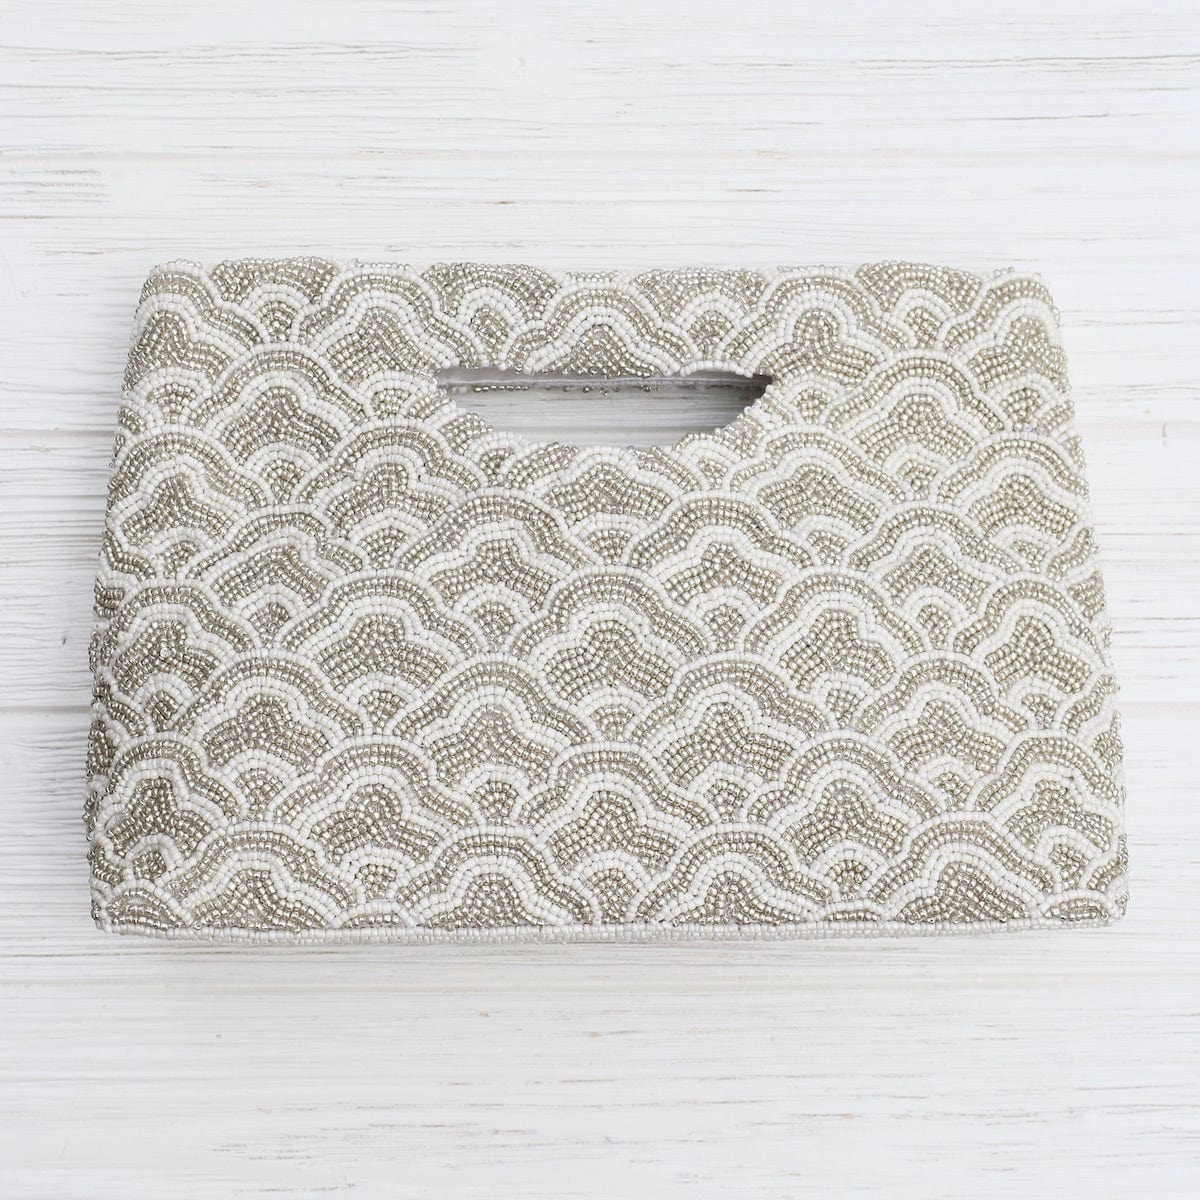 BAG Cut Out Handle Clutch in Ivory and Silver Waves